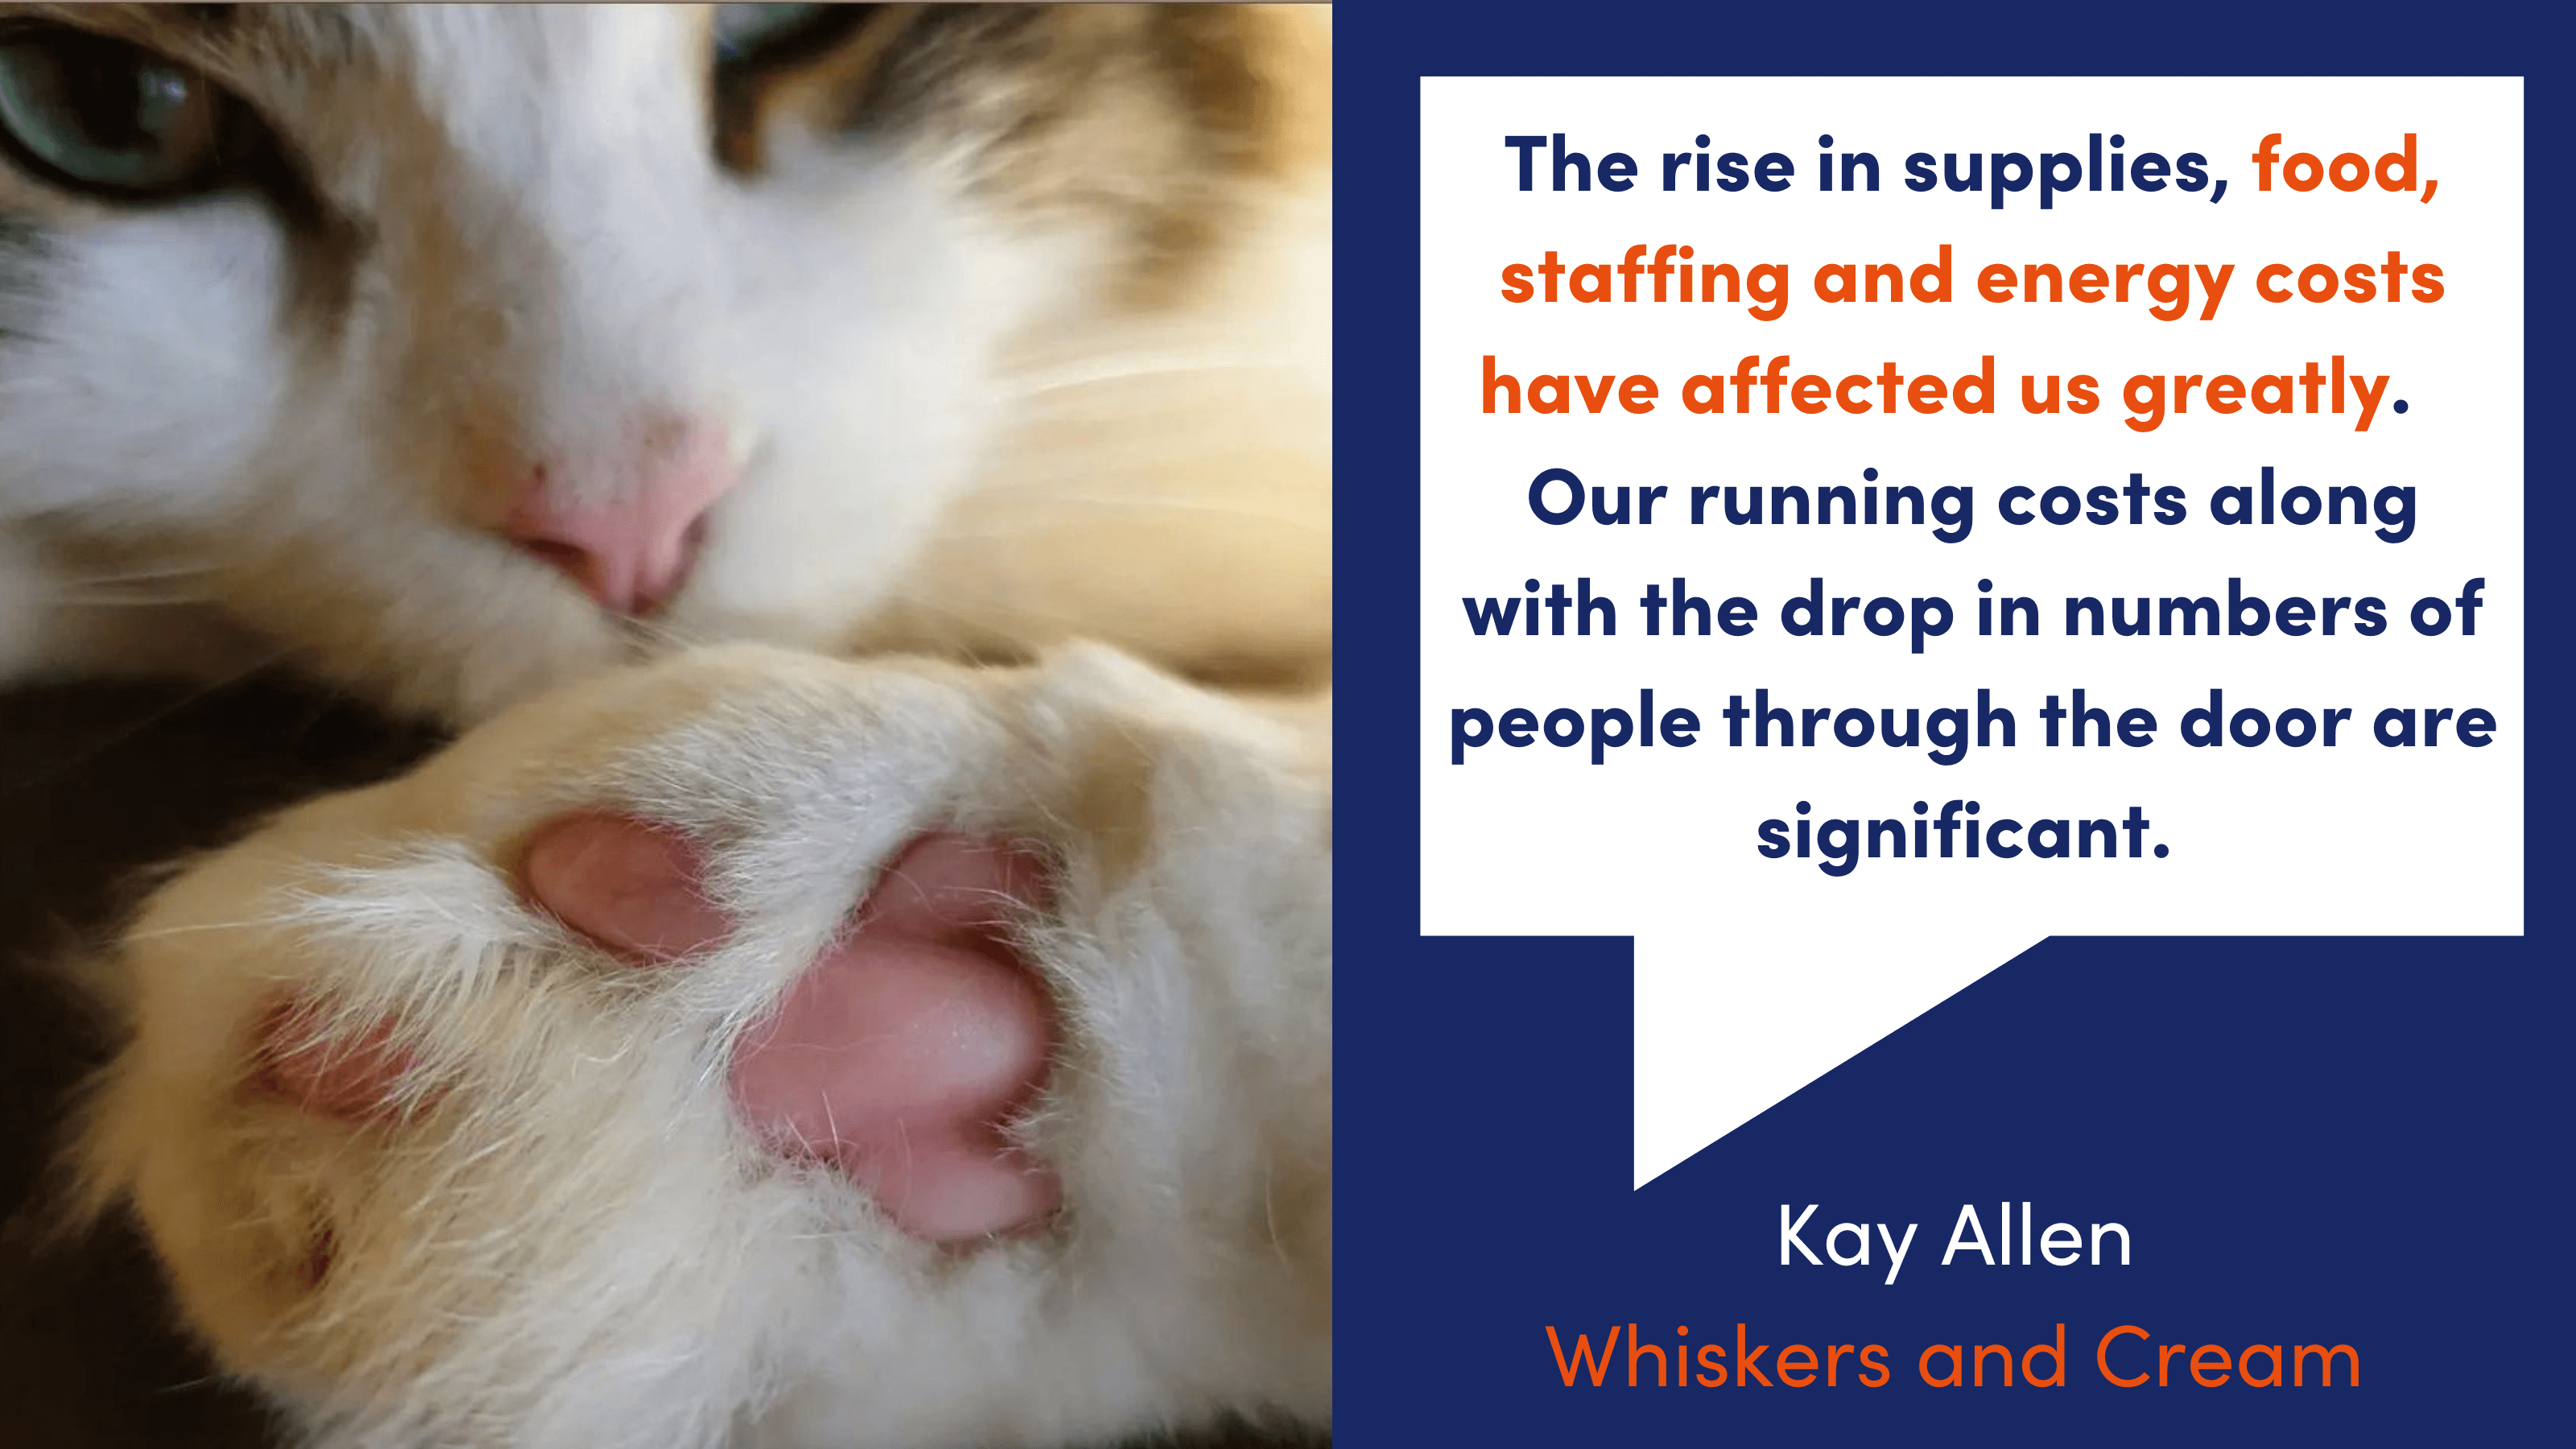 A cat lies down with a paw in front of its face. A quote from Kay Allen of Whiskers and Cream reads: "The rise in supplies, food, staffing and energy costs have affected us greatly.   Our running costs along with the drop in numbers of people through the door are significant."